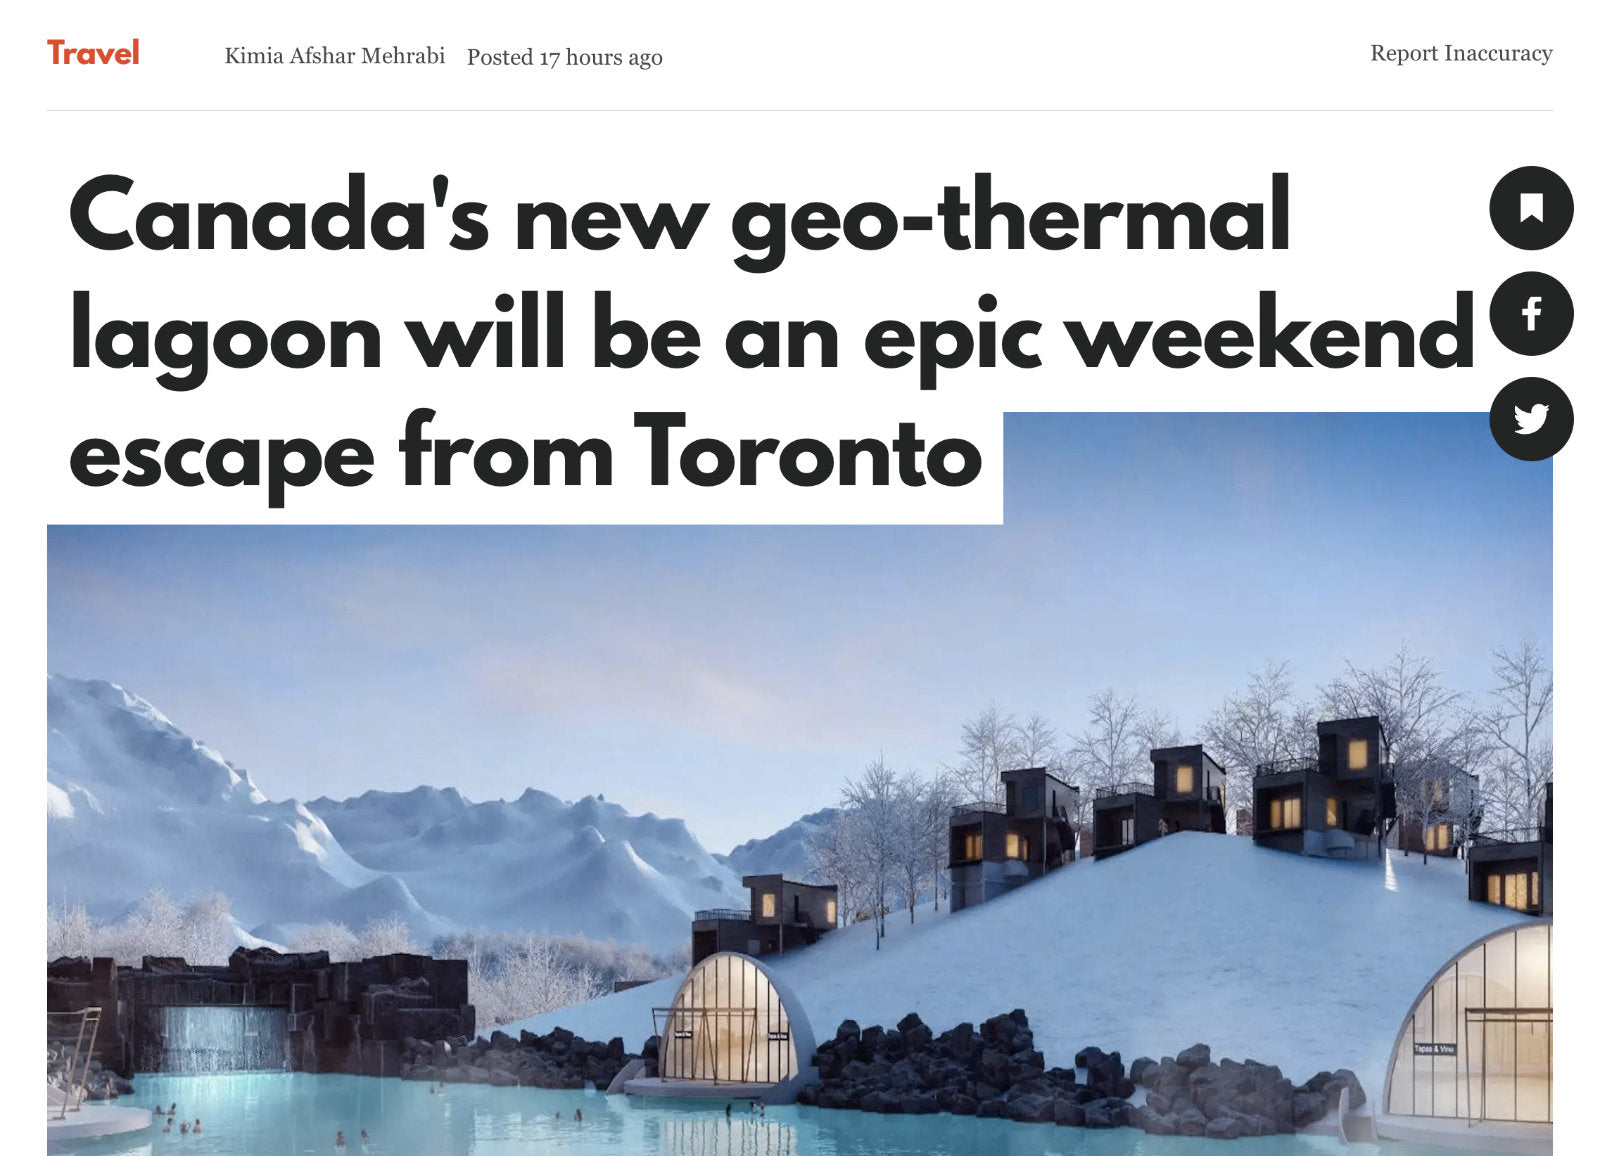 [EN] Canada's new geo-thermal lagoon will be an epic weekend escape from Toronto